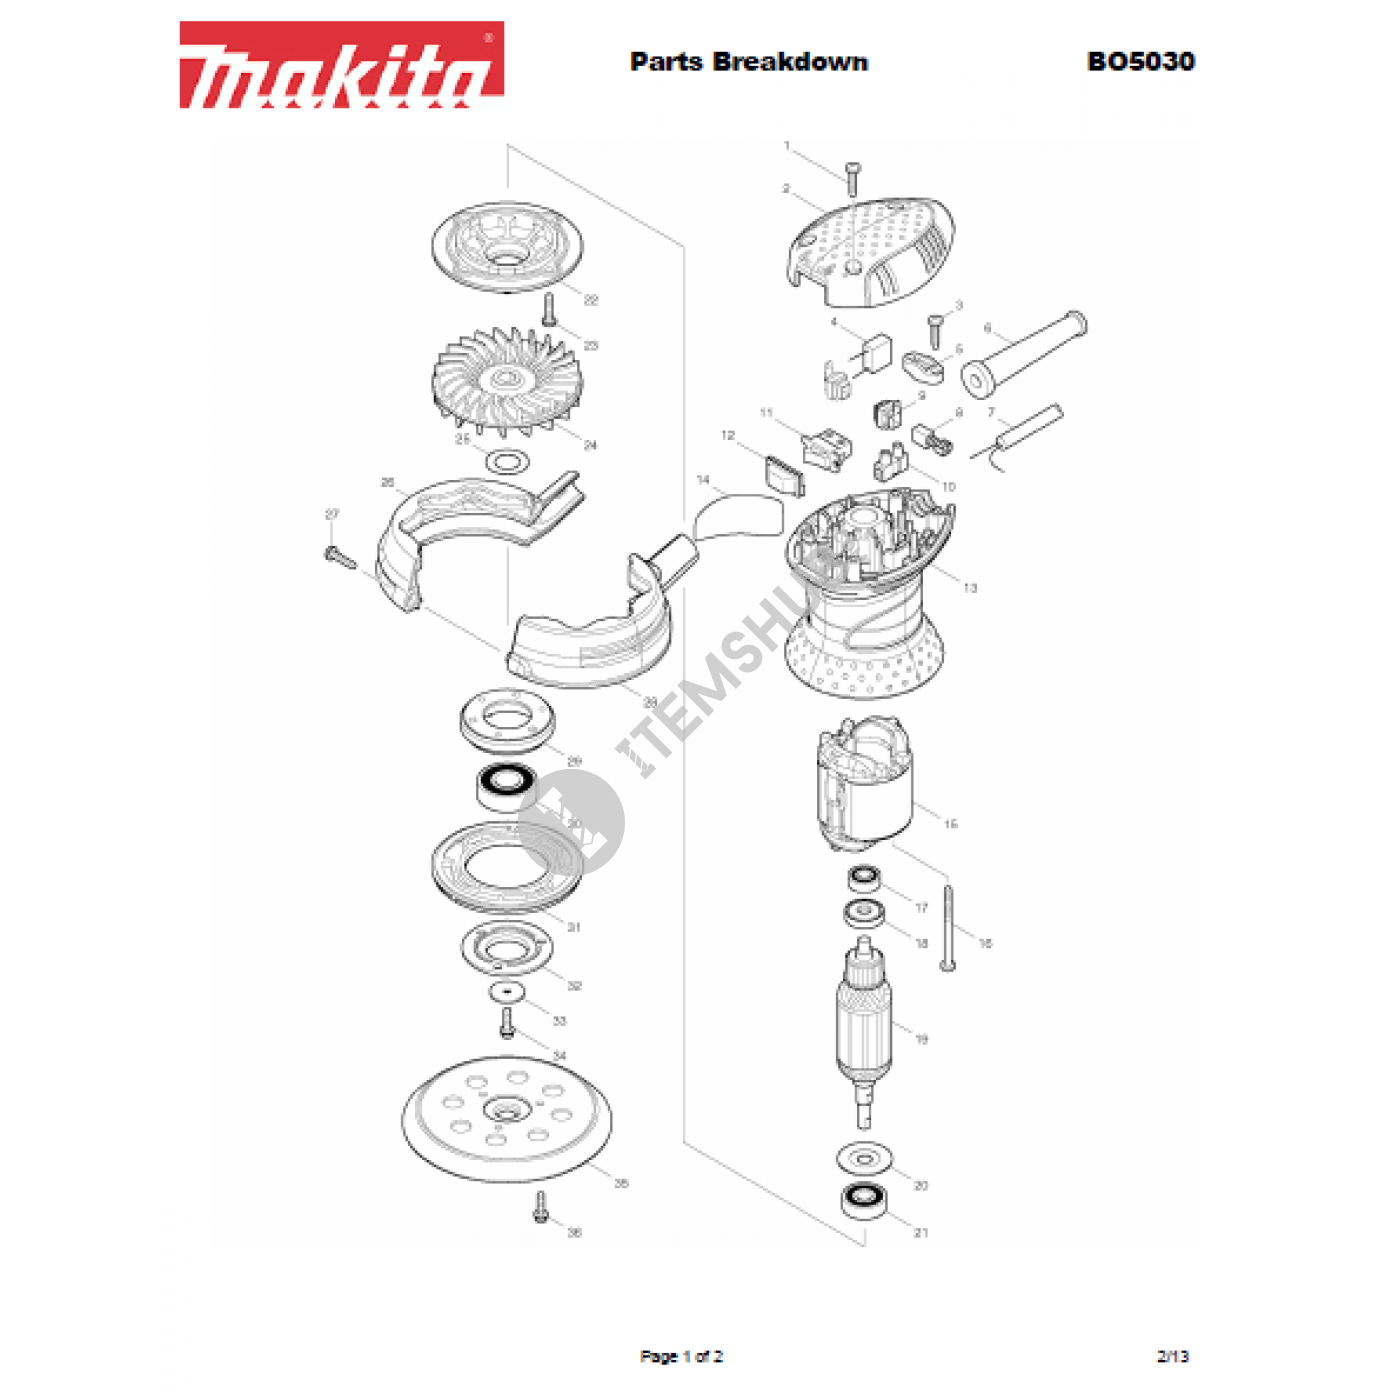 you Are Buying Part of The Picture for sale online 651527-9 Switch for Makita Bo5030 